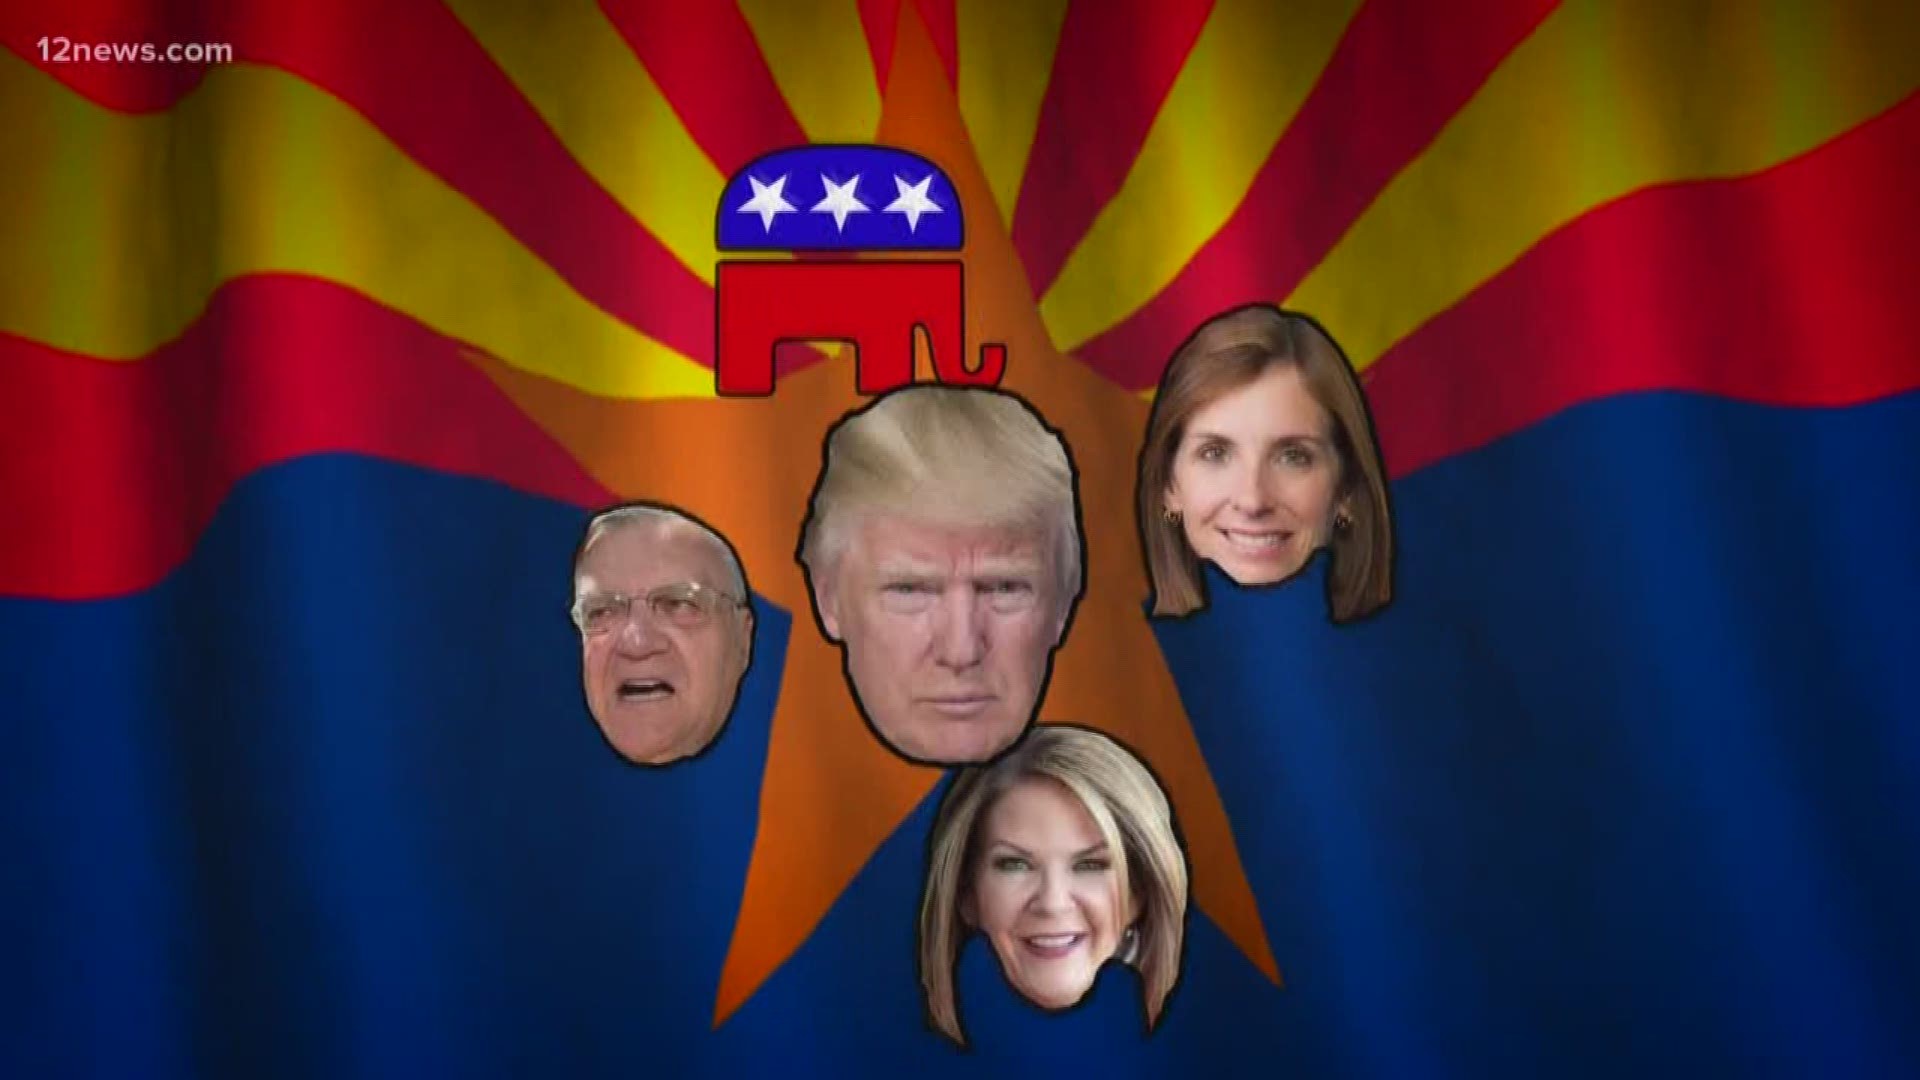 It's a tight race in Arizona for Republican candidates running for the US Senate. Experts say whomever President Trump favors could likely be the winner.